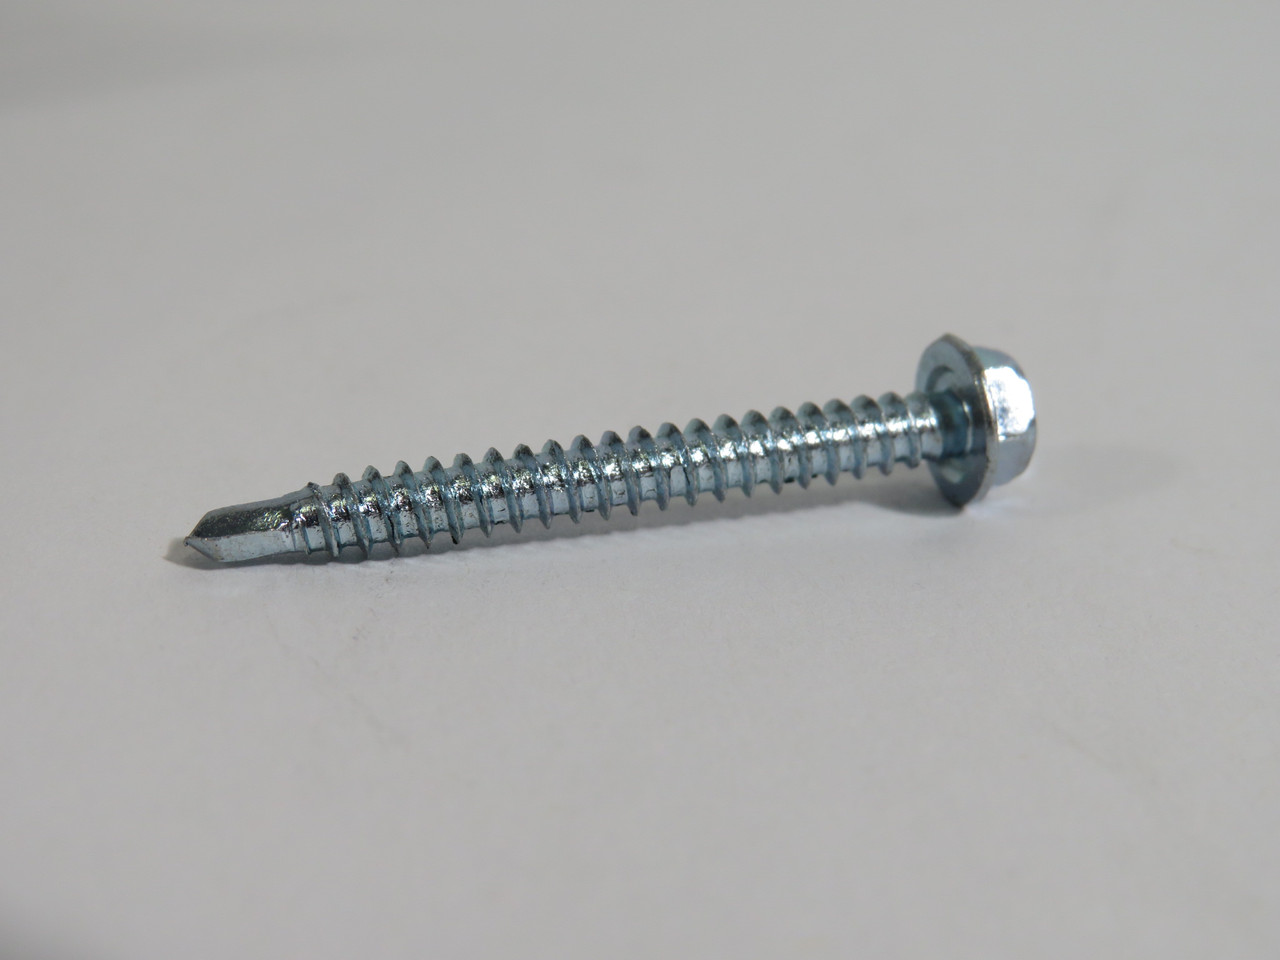 Papco 232 076 Self Drilling Tapping Screw Hex 8 X 1 12 Lot Of 86 New Industrial Automation 